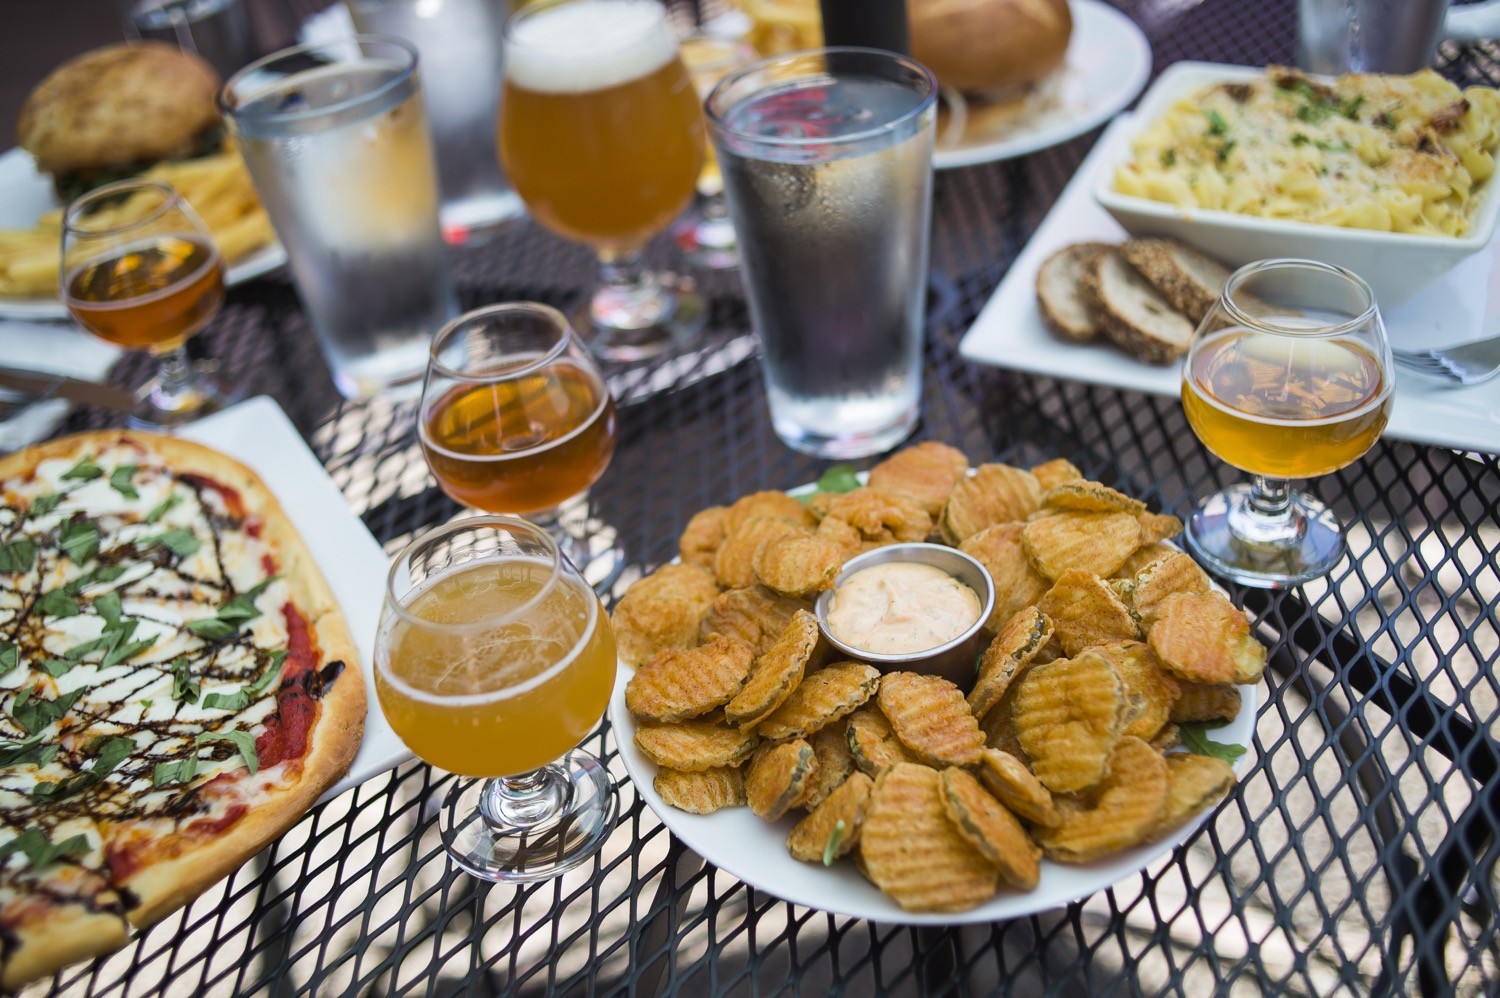 Food and beer from Airways Bistro in Kent, Washington